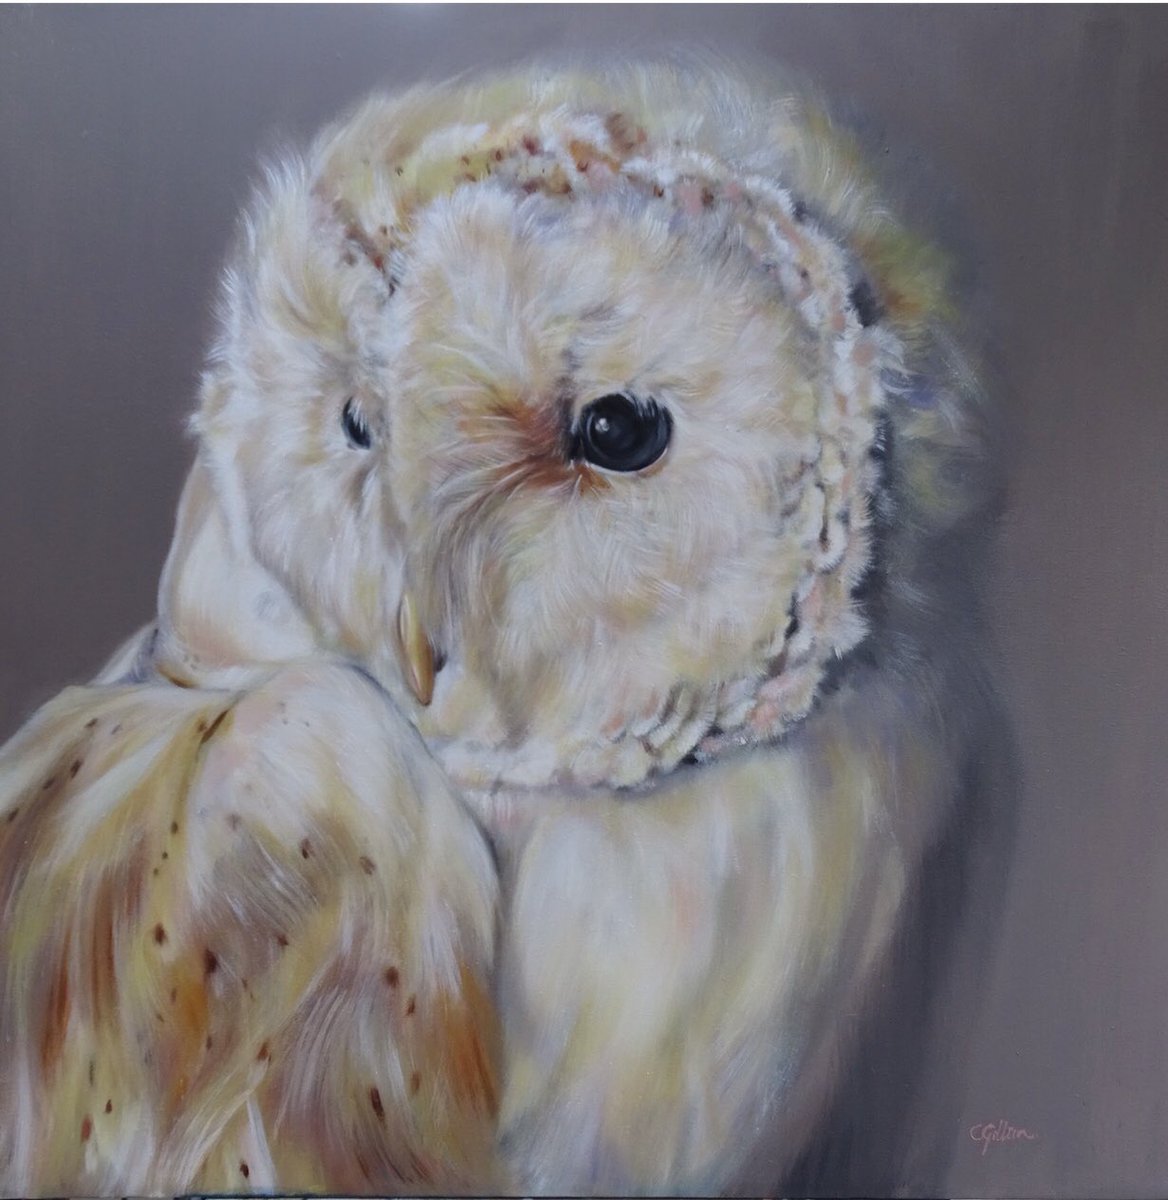 Another for #colour_collective #smoke 😁

#barnowl #wildlifeart #commissionart #artlicensing #whatahoot